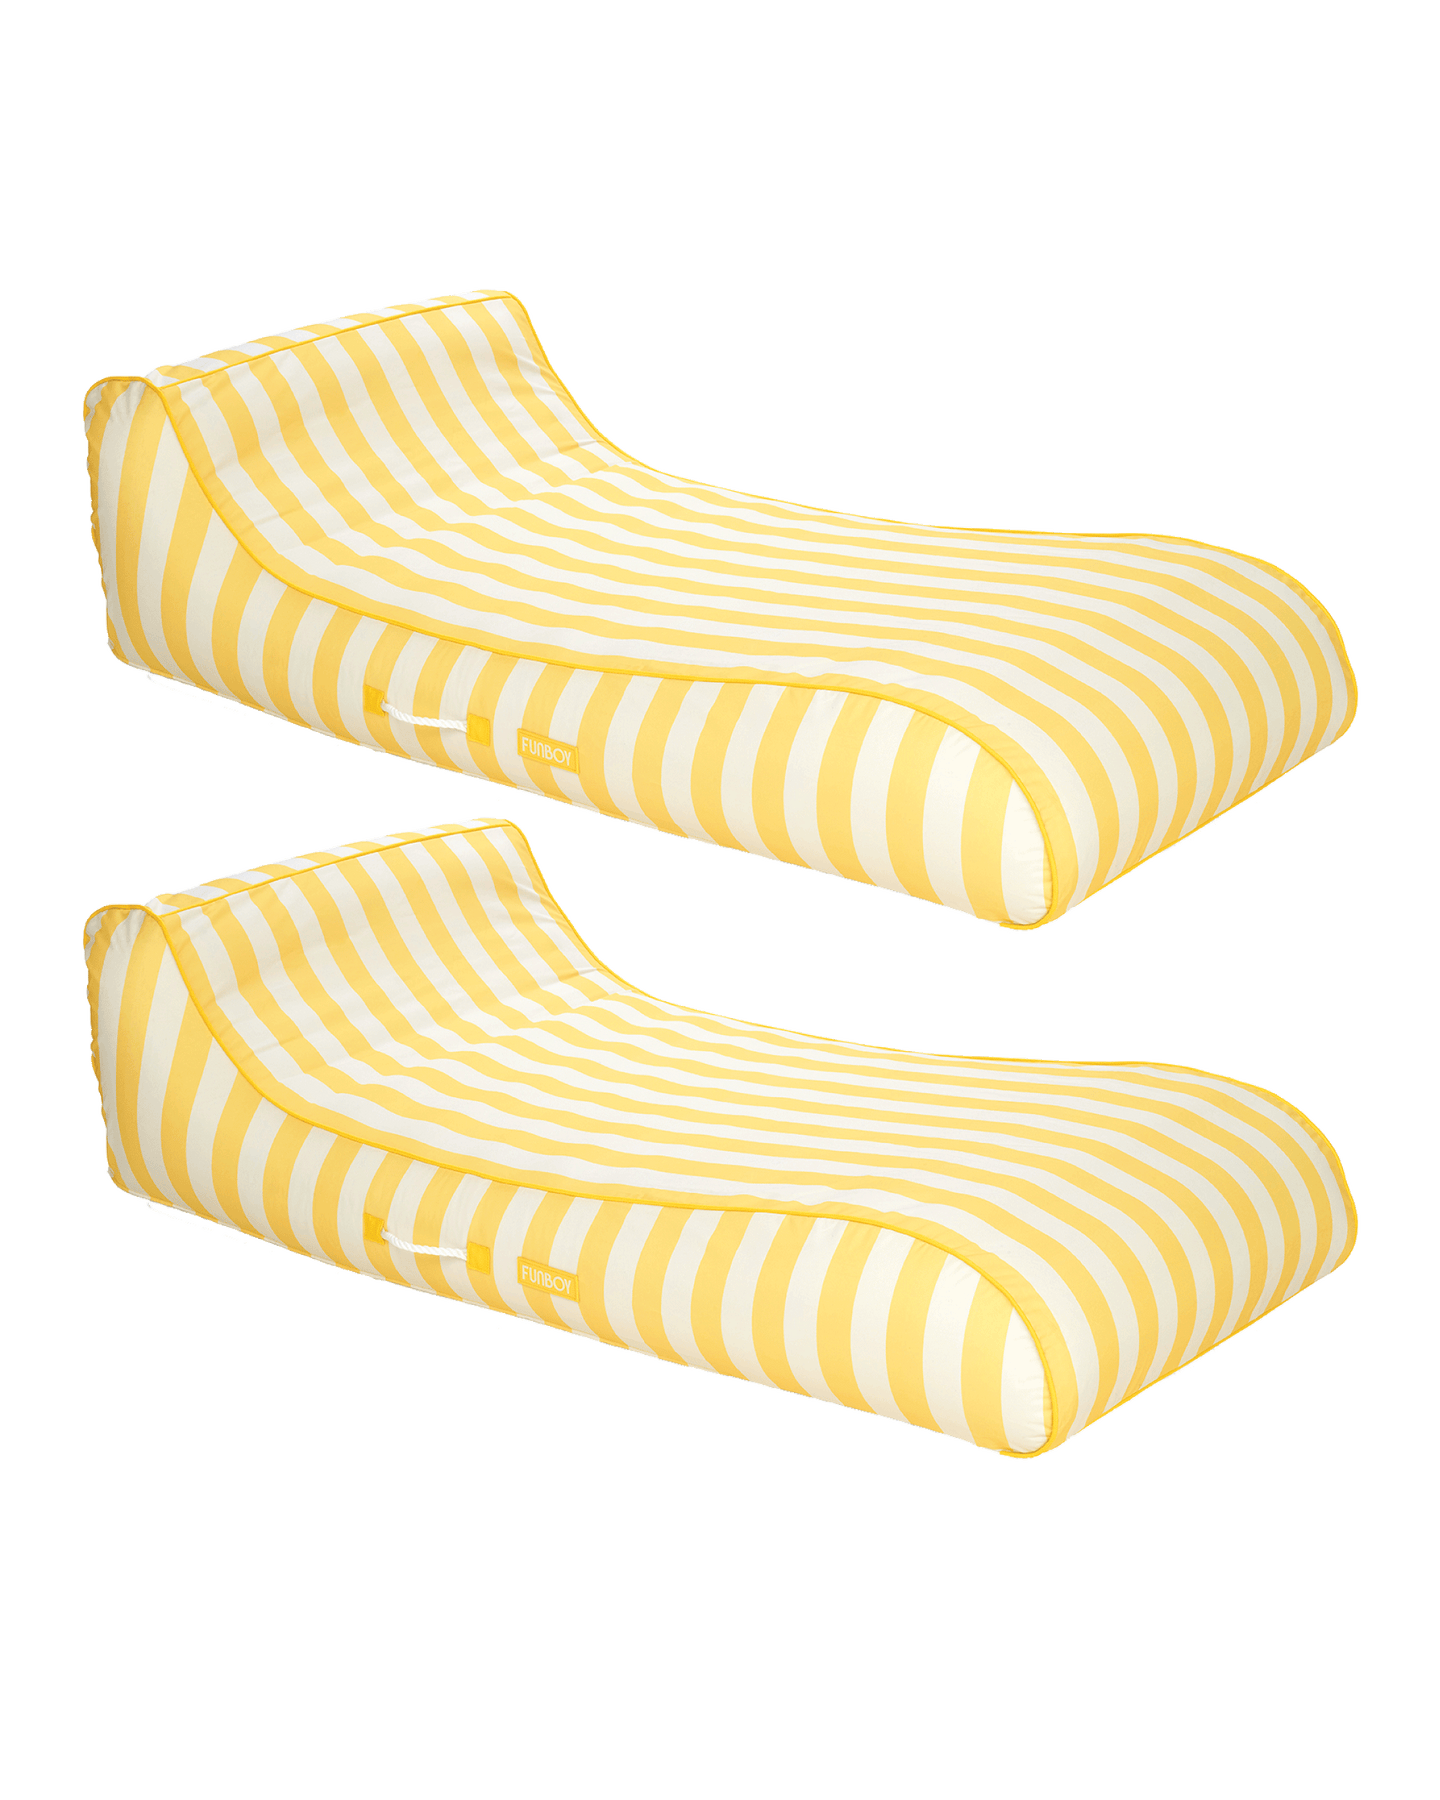 Yellow Striped Cabana Fabric Sunbed Lounger - 2 Pack